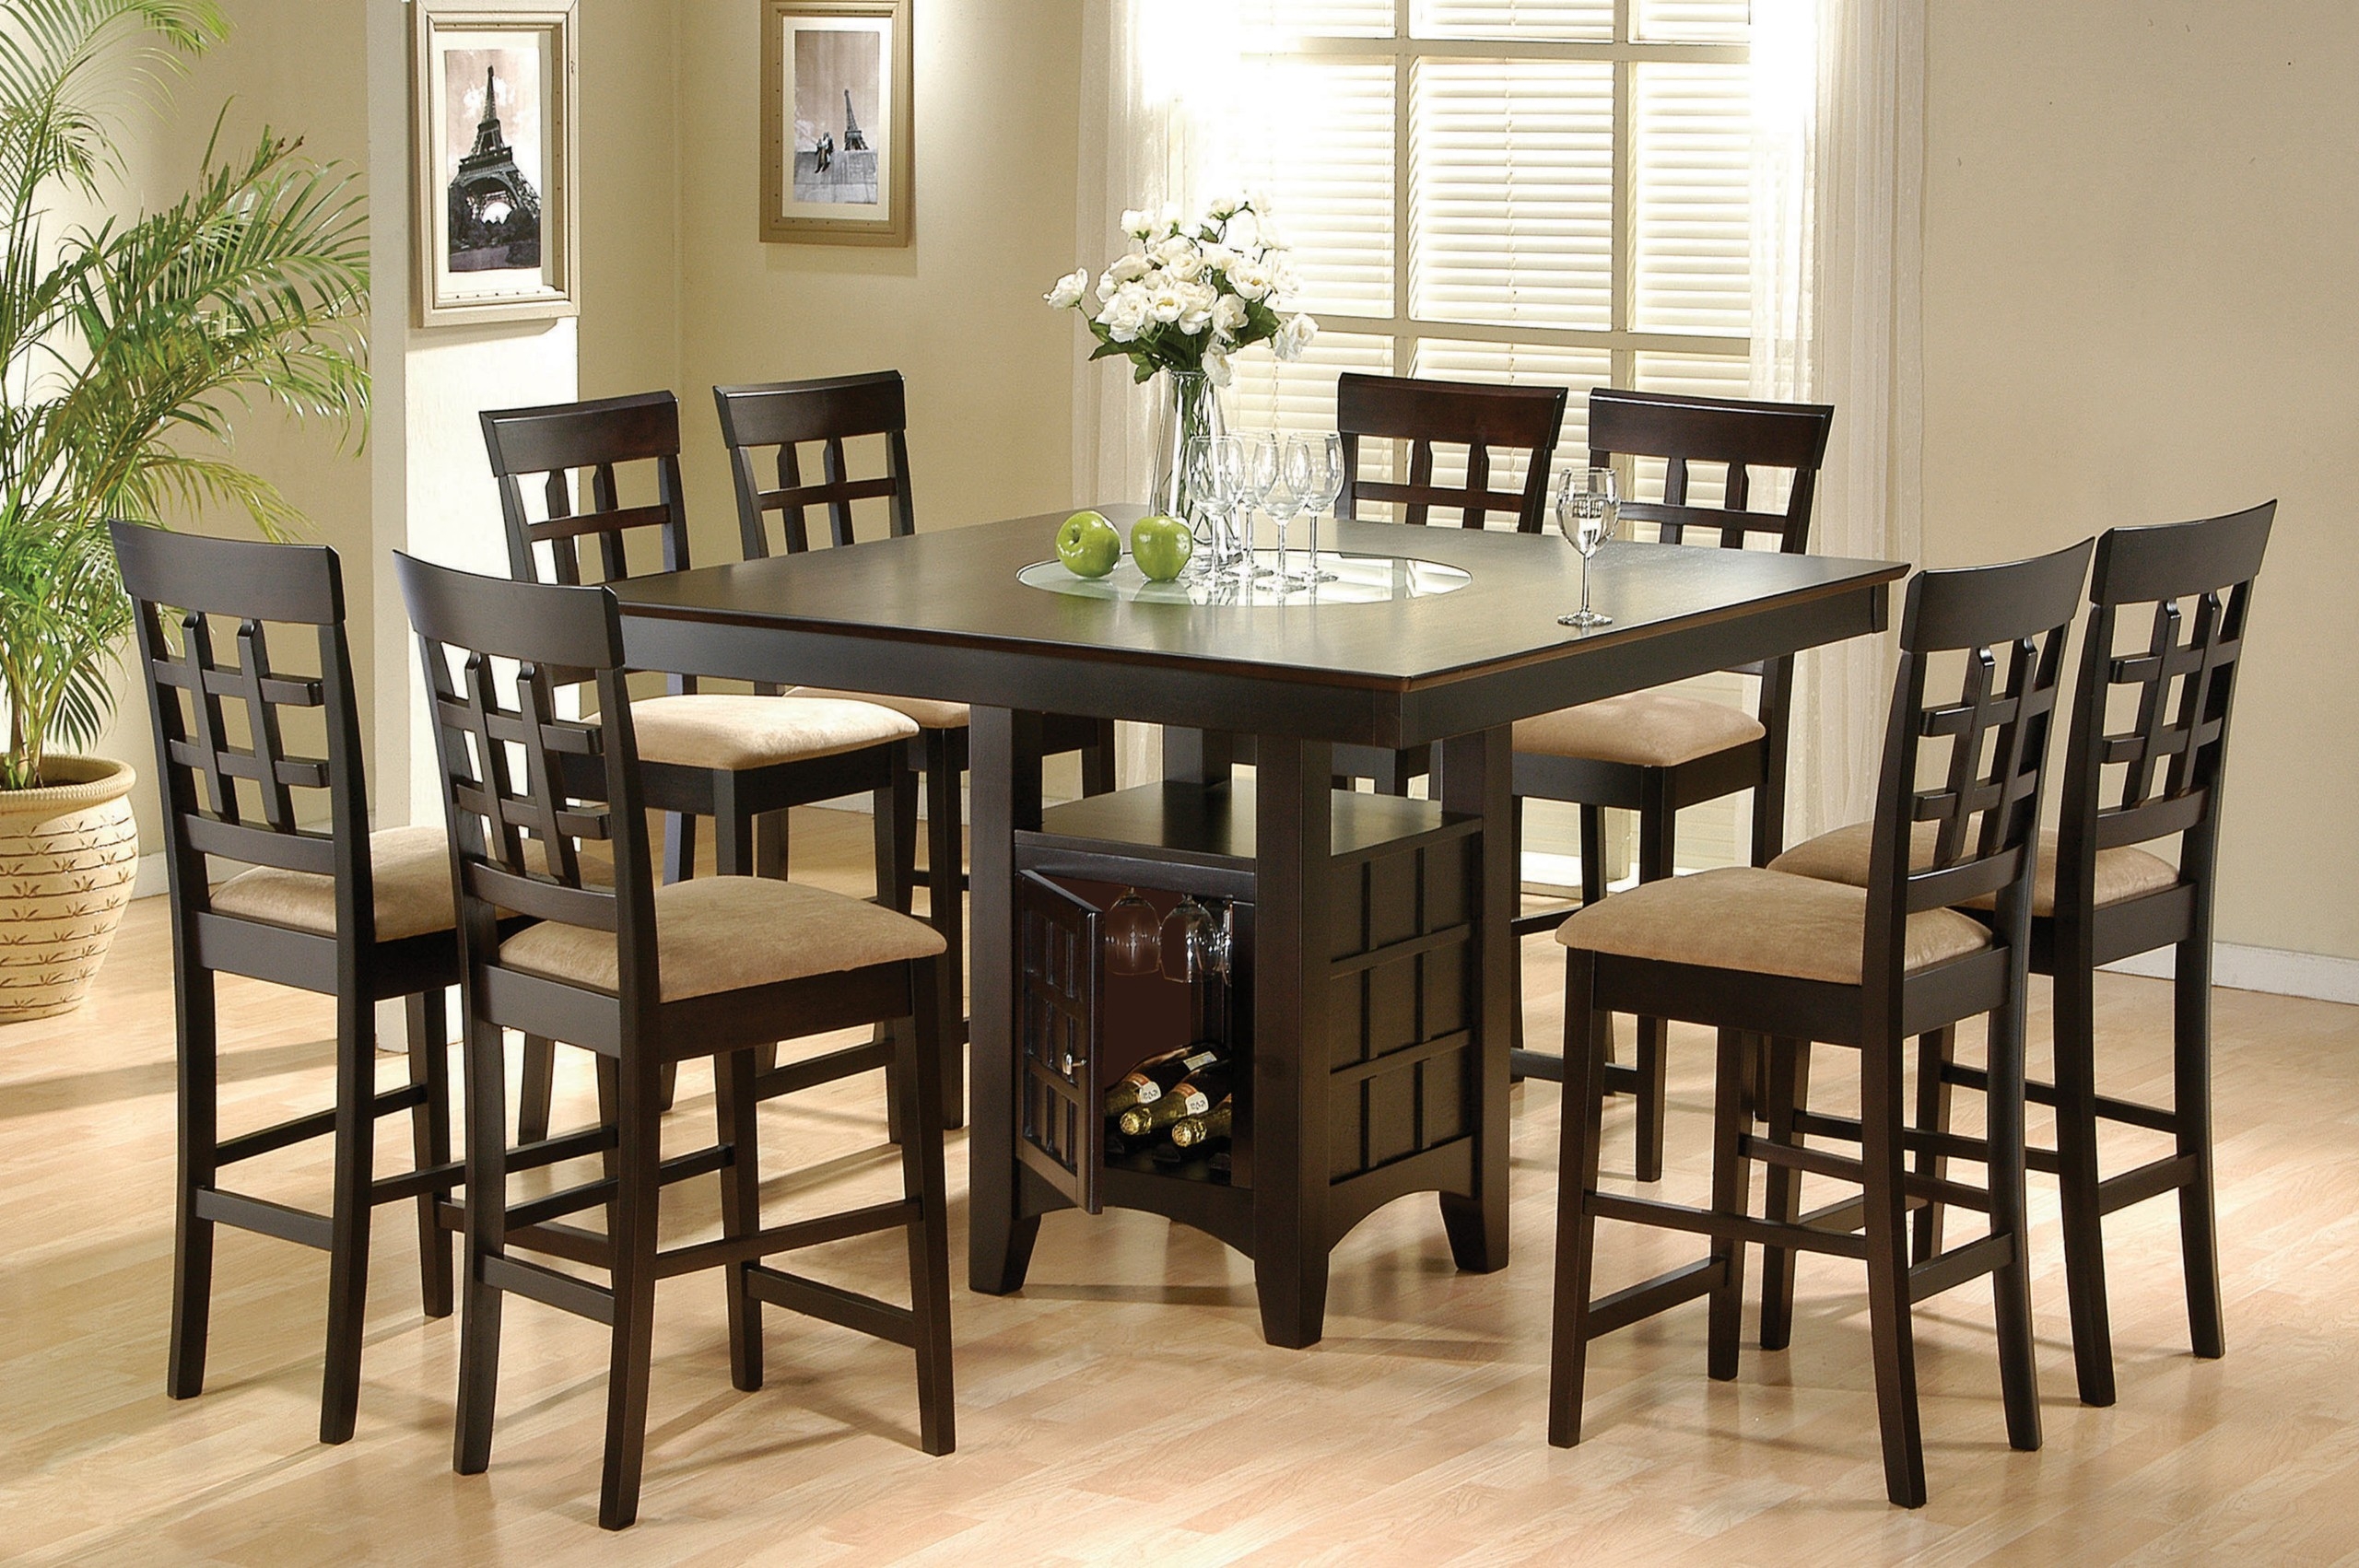 8 seater kitchen table and chairs